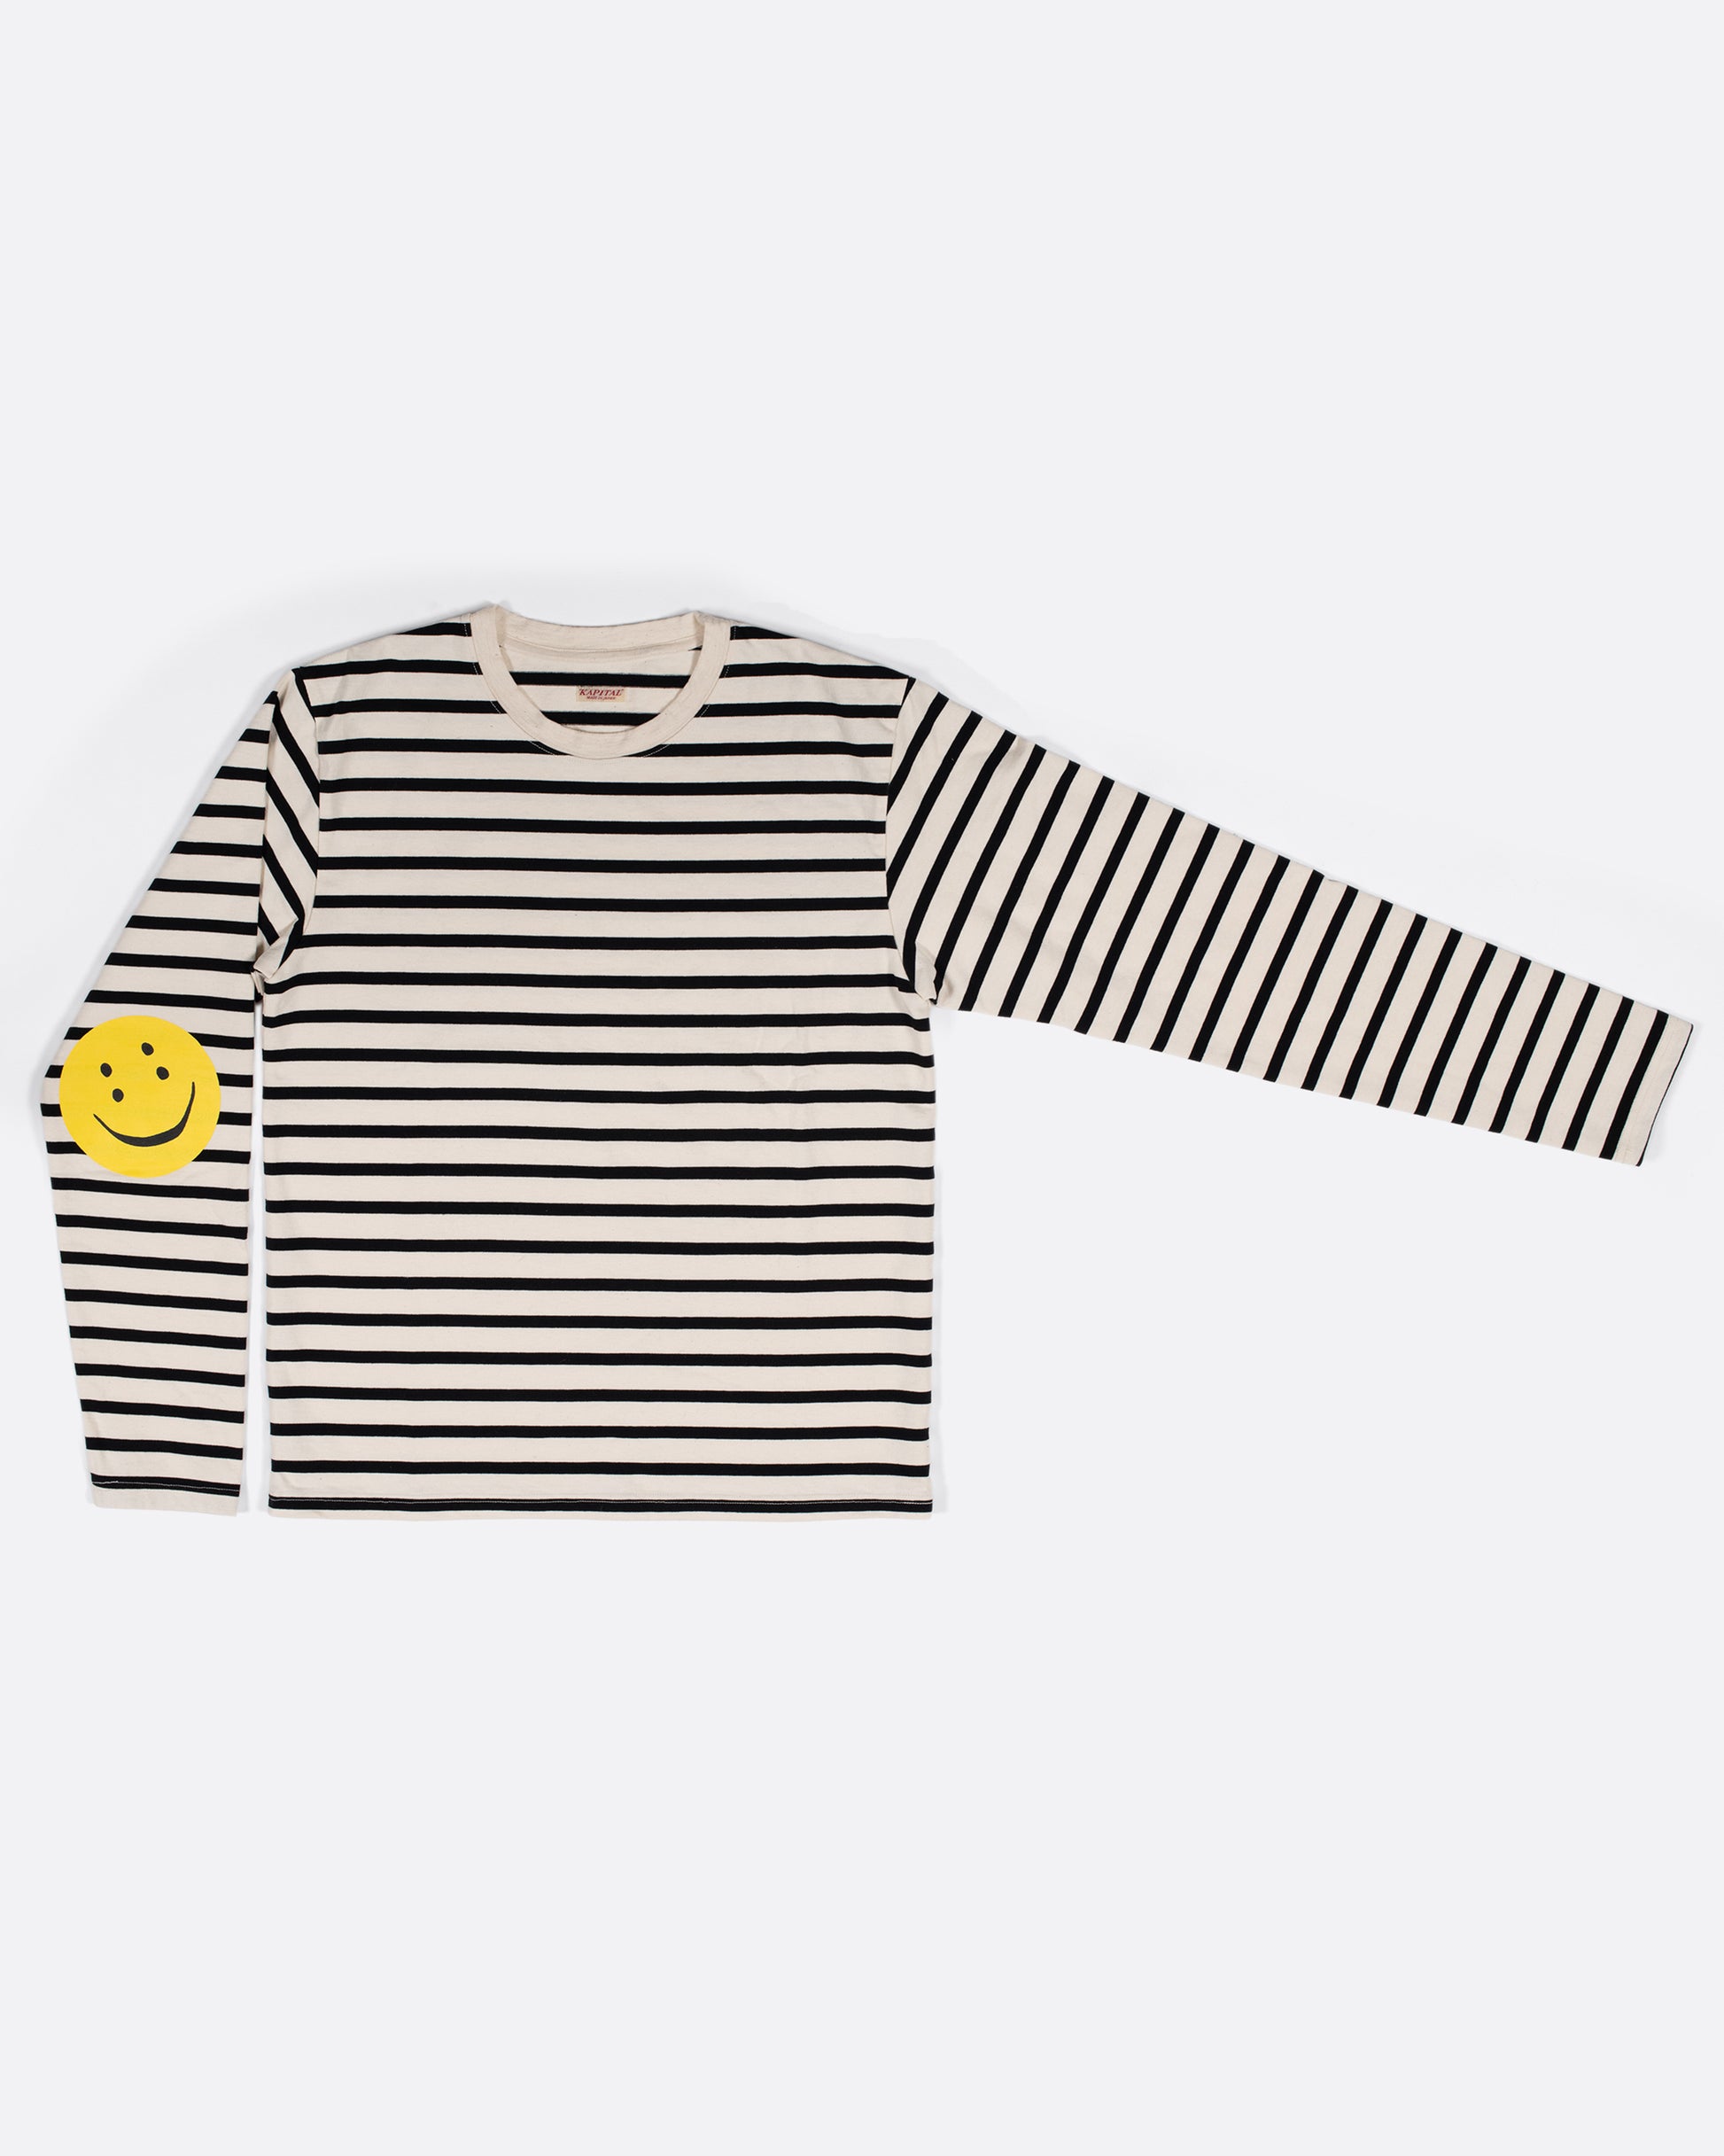 A black and white striped, cotton, crewneck shirt with Kapital's fan favorite rainbow smiley elbow patches.